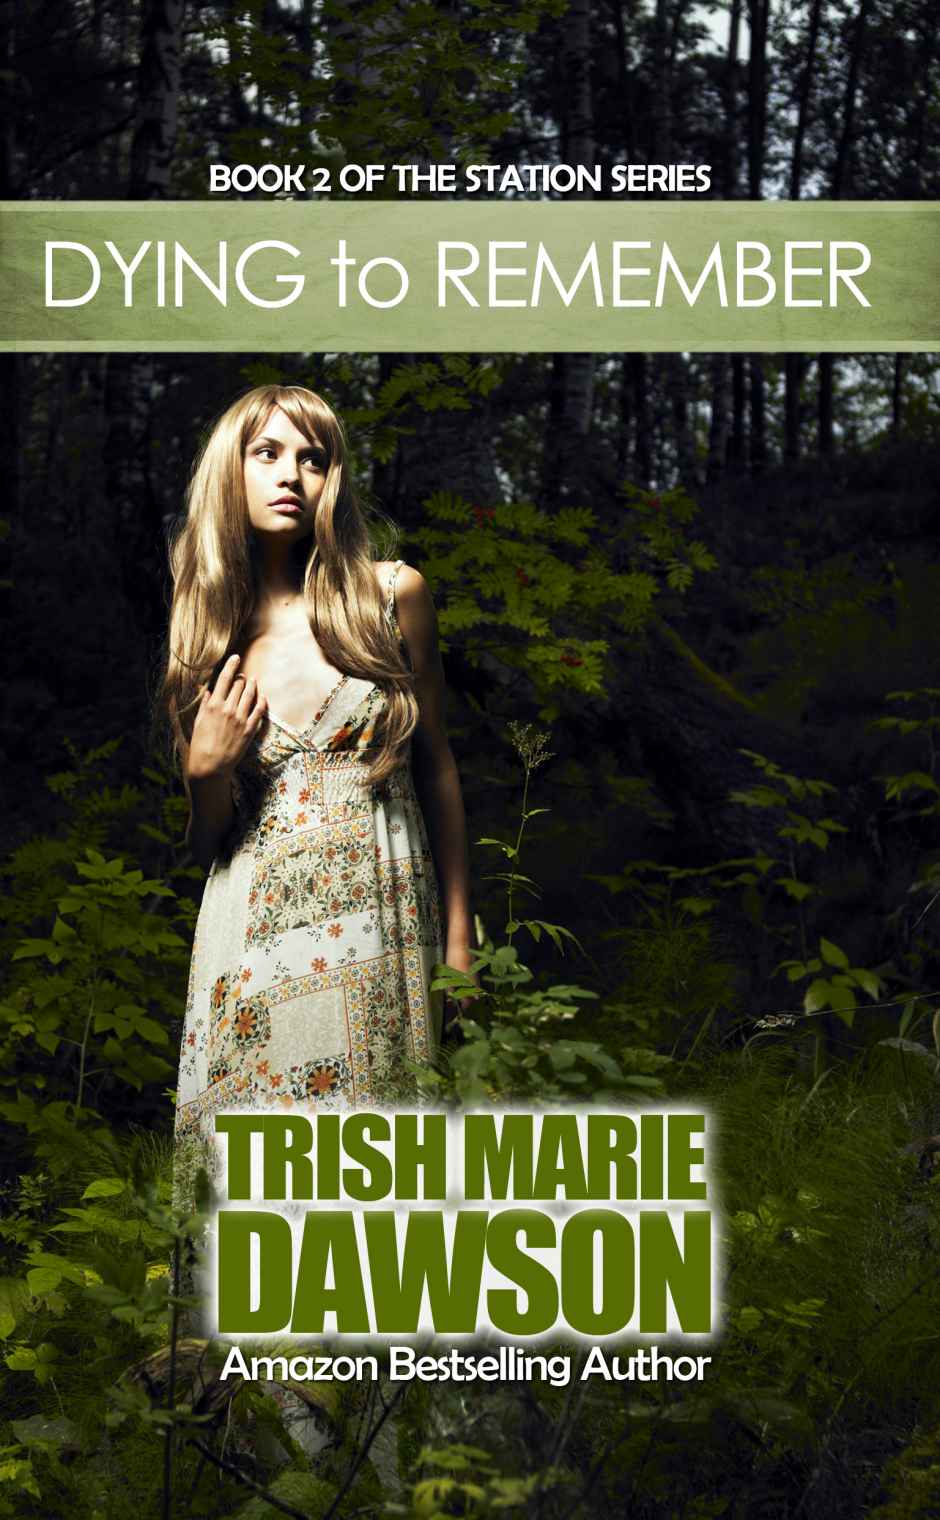 Dying to Remember (The Station #2) by Trish Marie Dawson